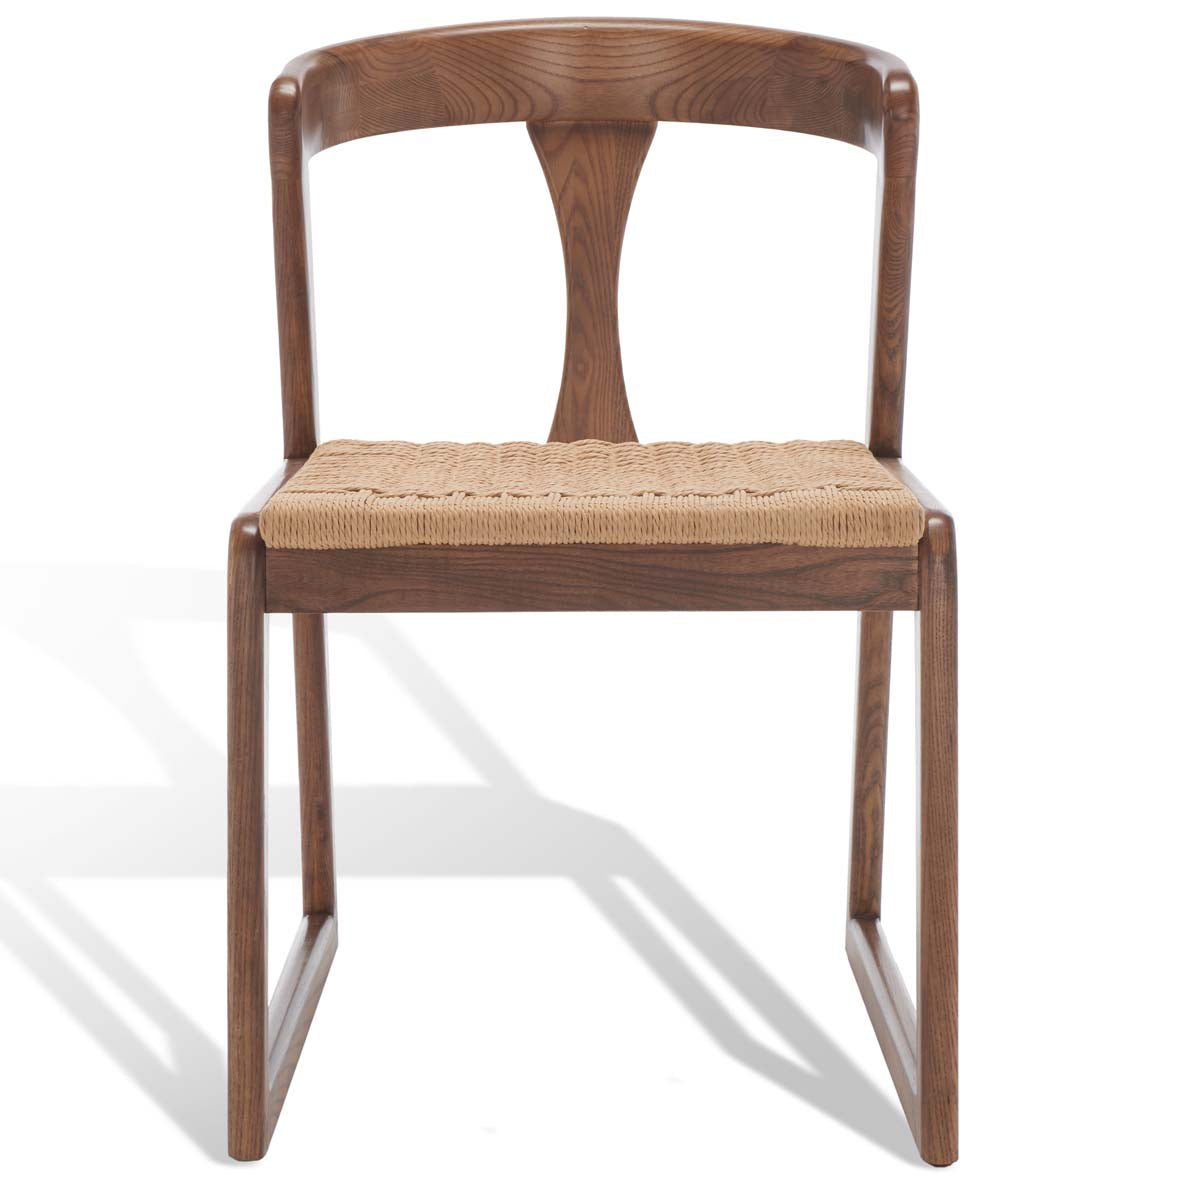 Safavieh Couture Jamal Woven Dining Chair